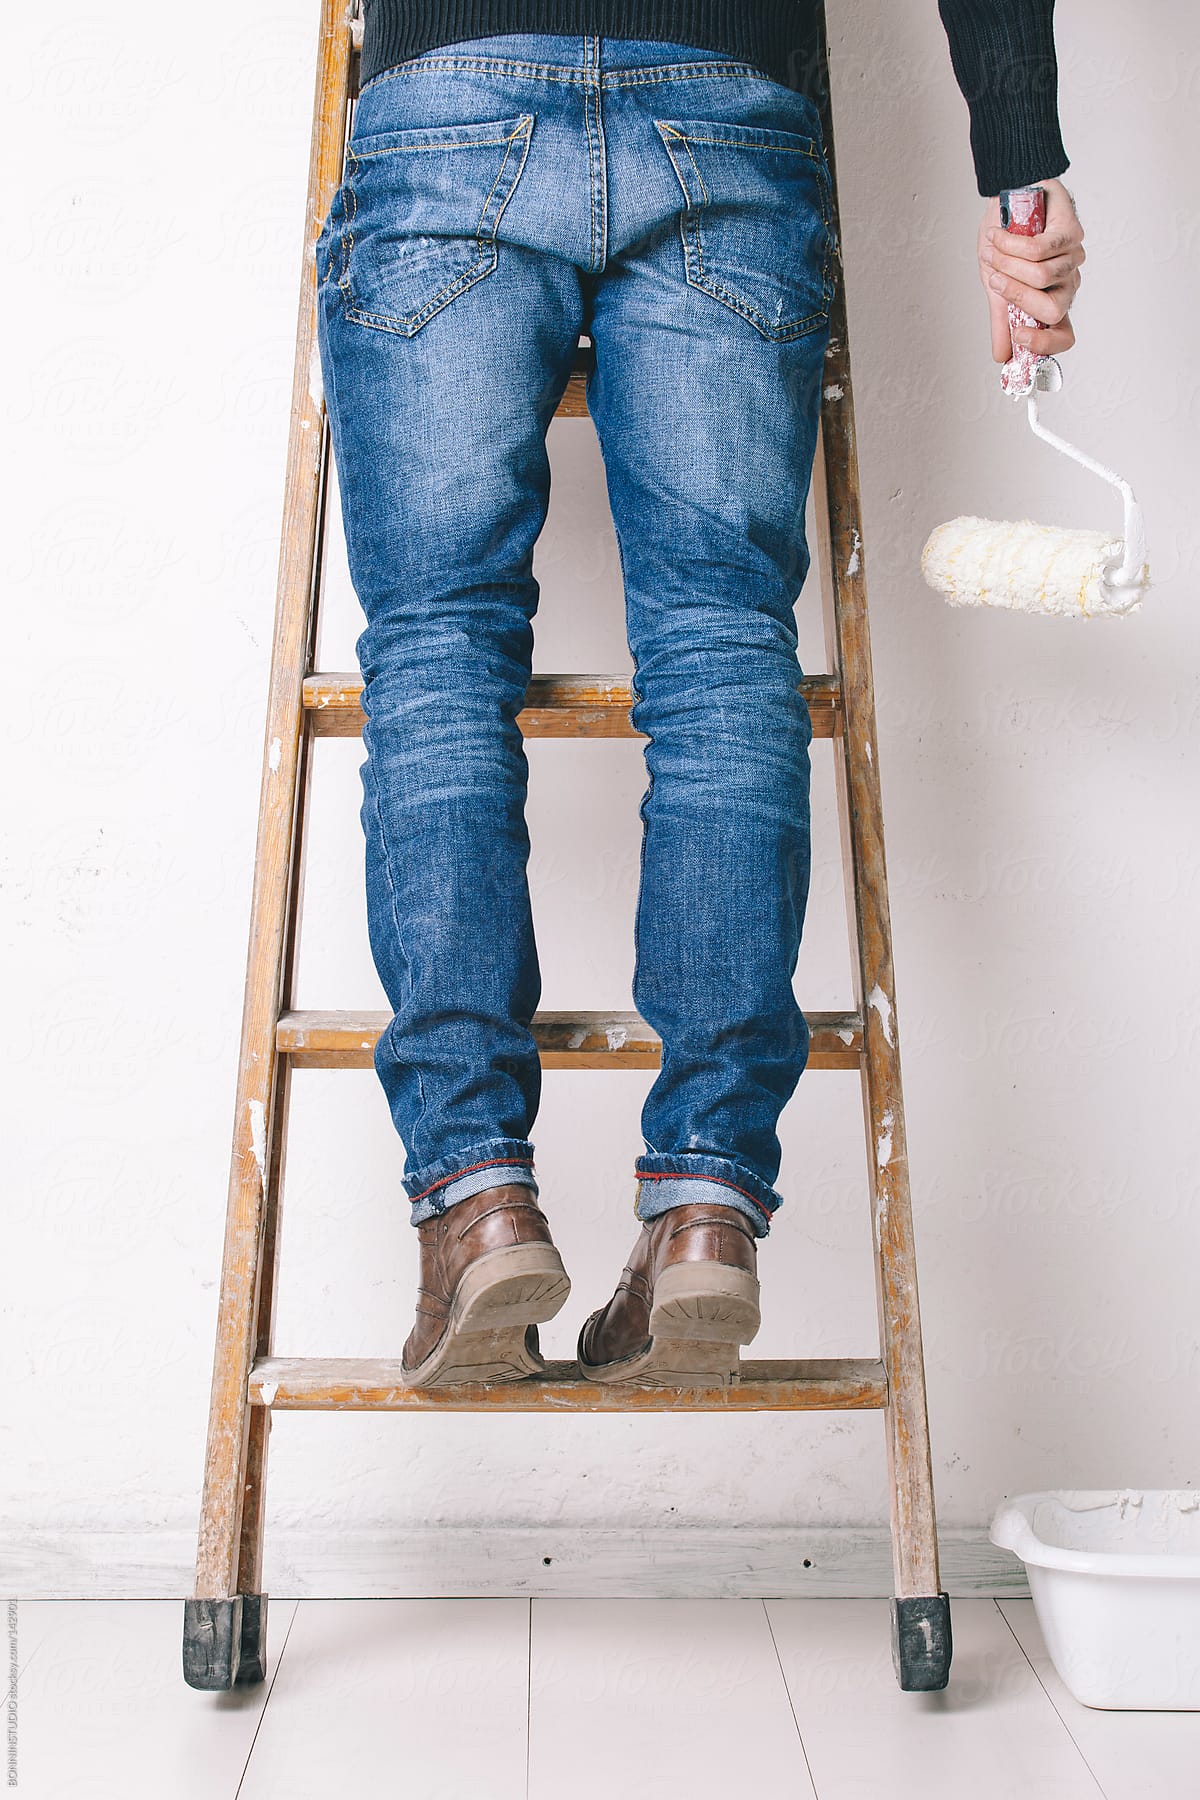 Man painting a wall on a wood ladder.